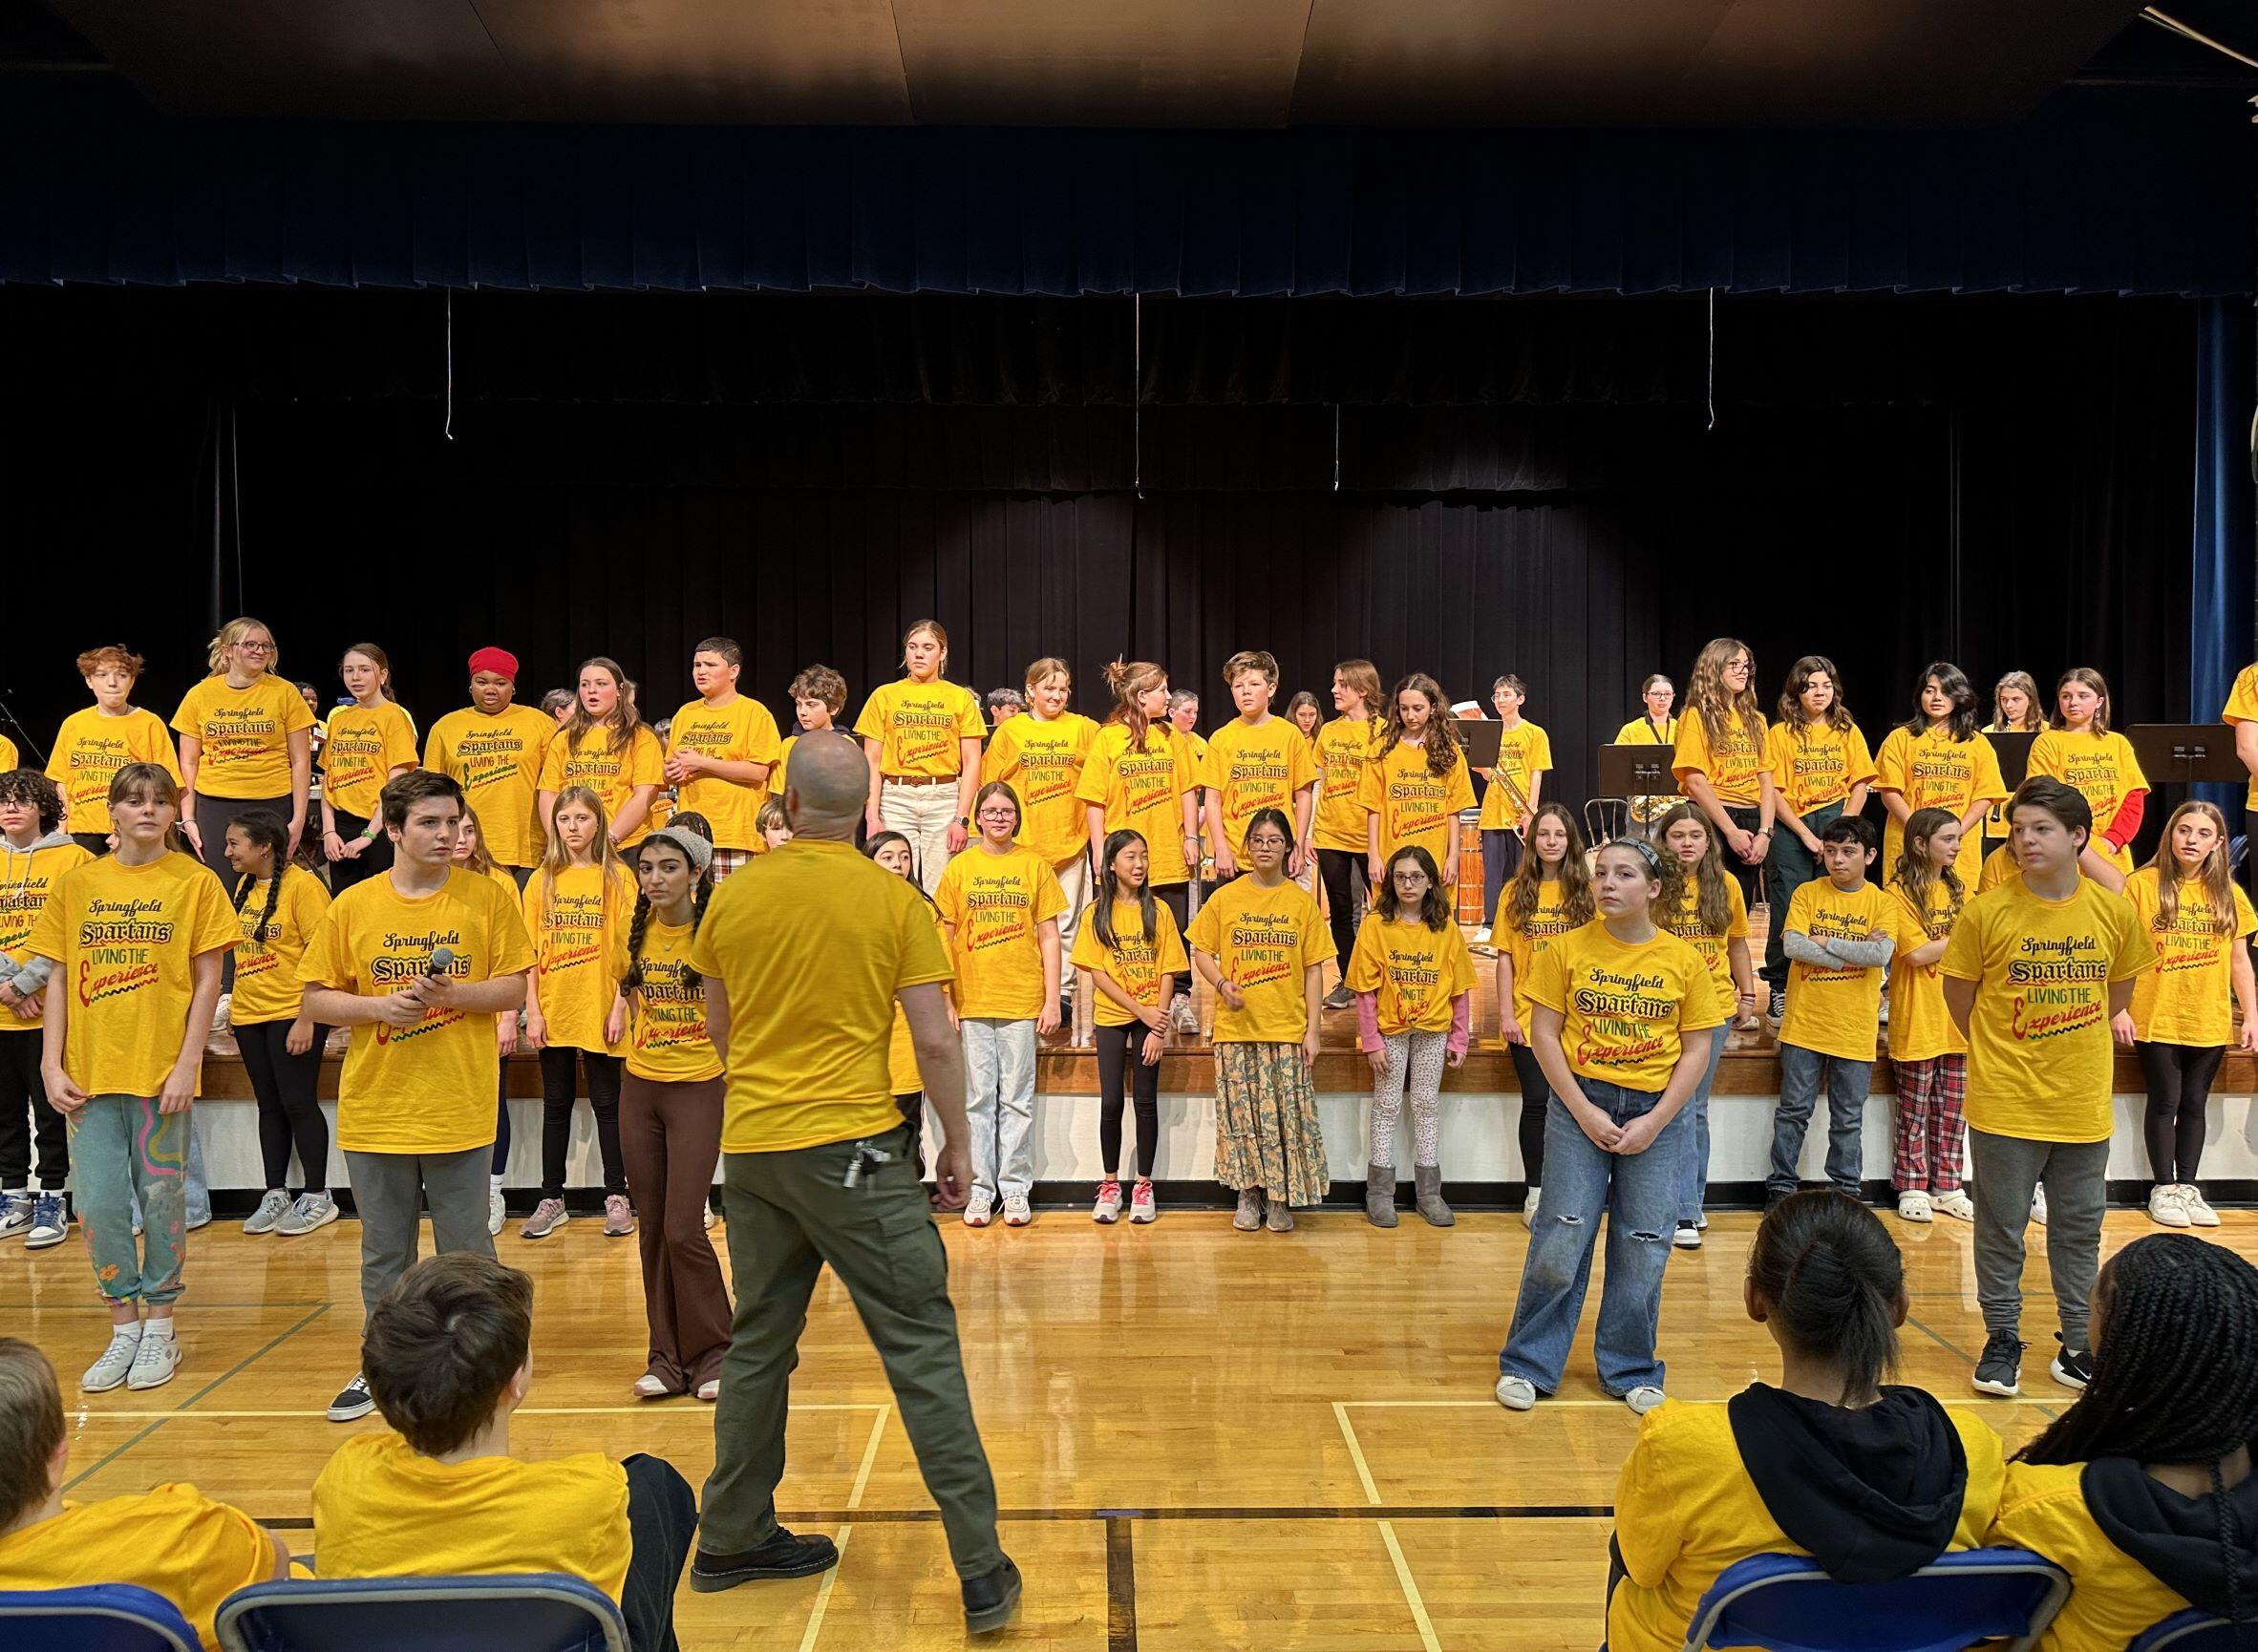 Chorus students practicing, all wearing the same yellow shirt that states: Springfield Spartans Living the Experience